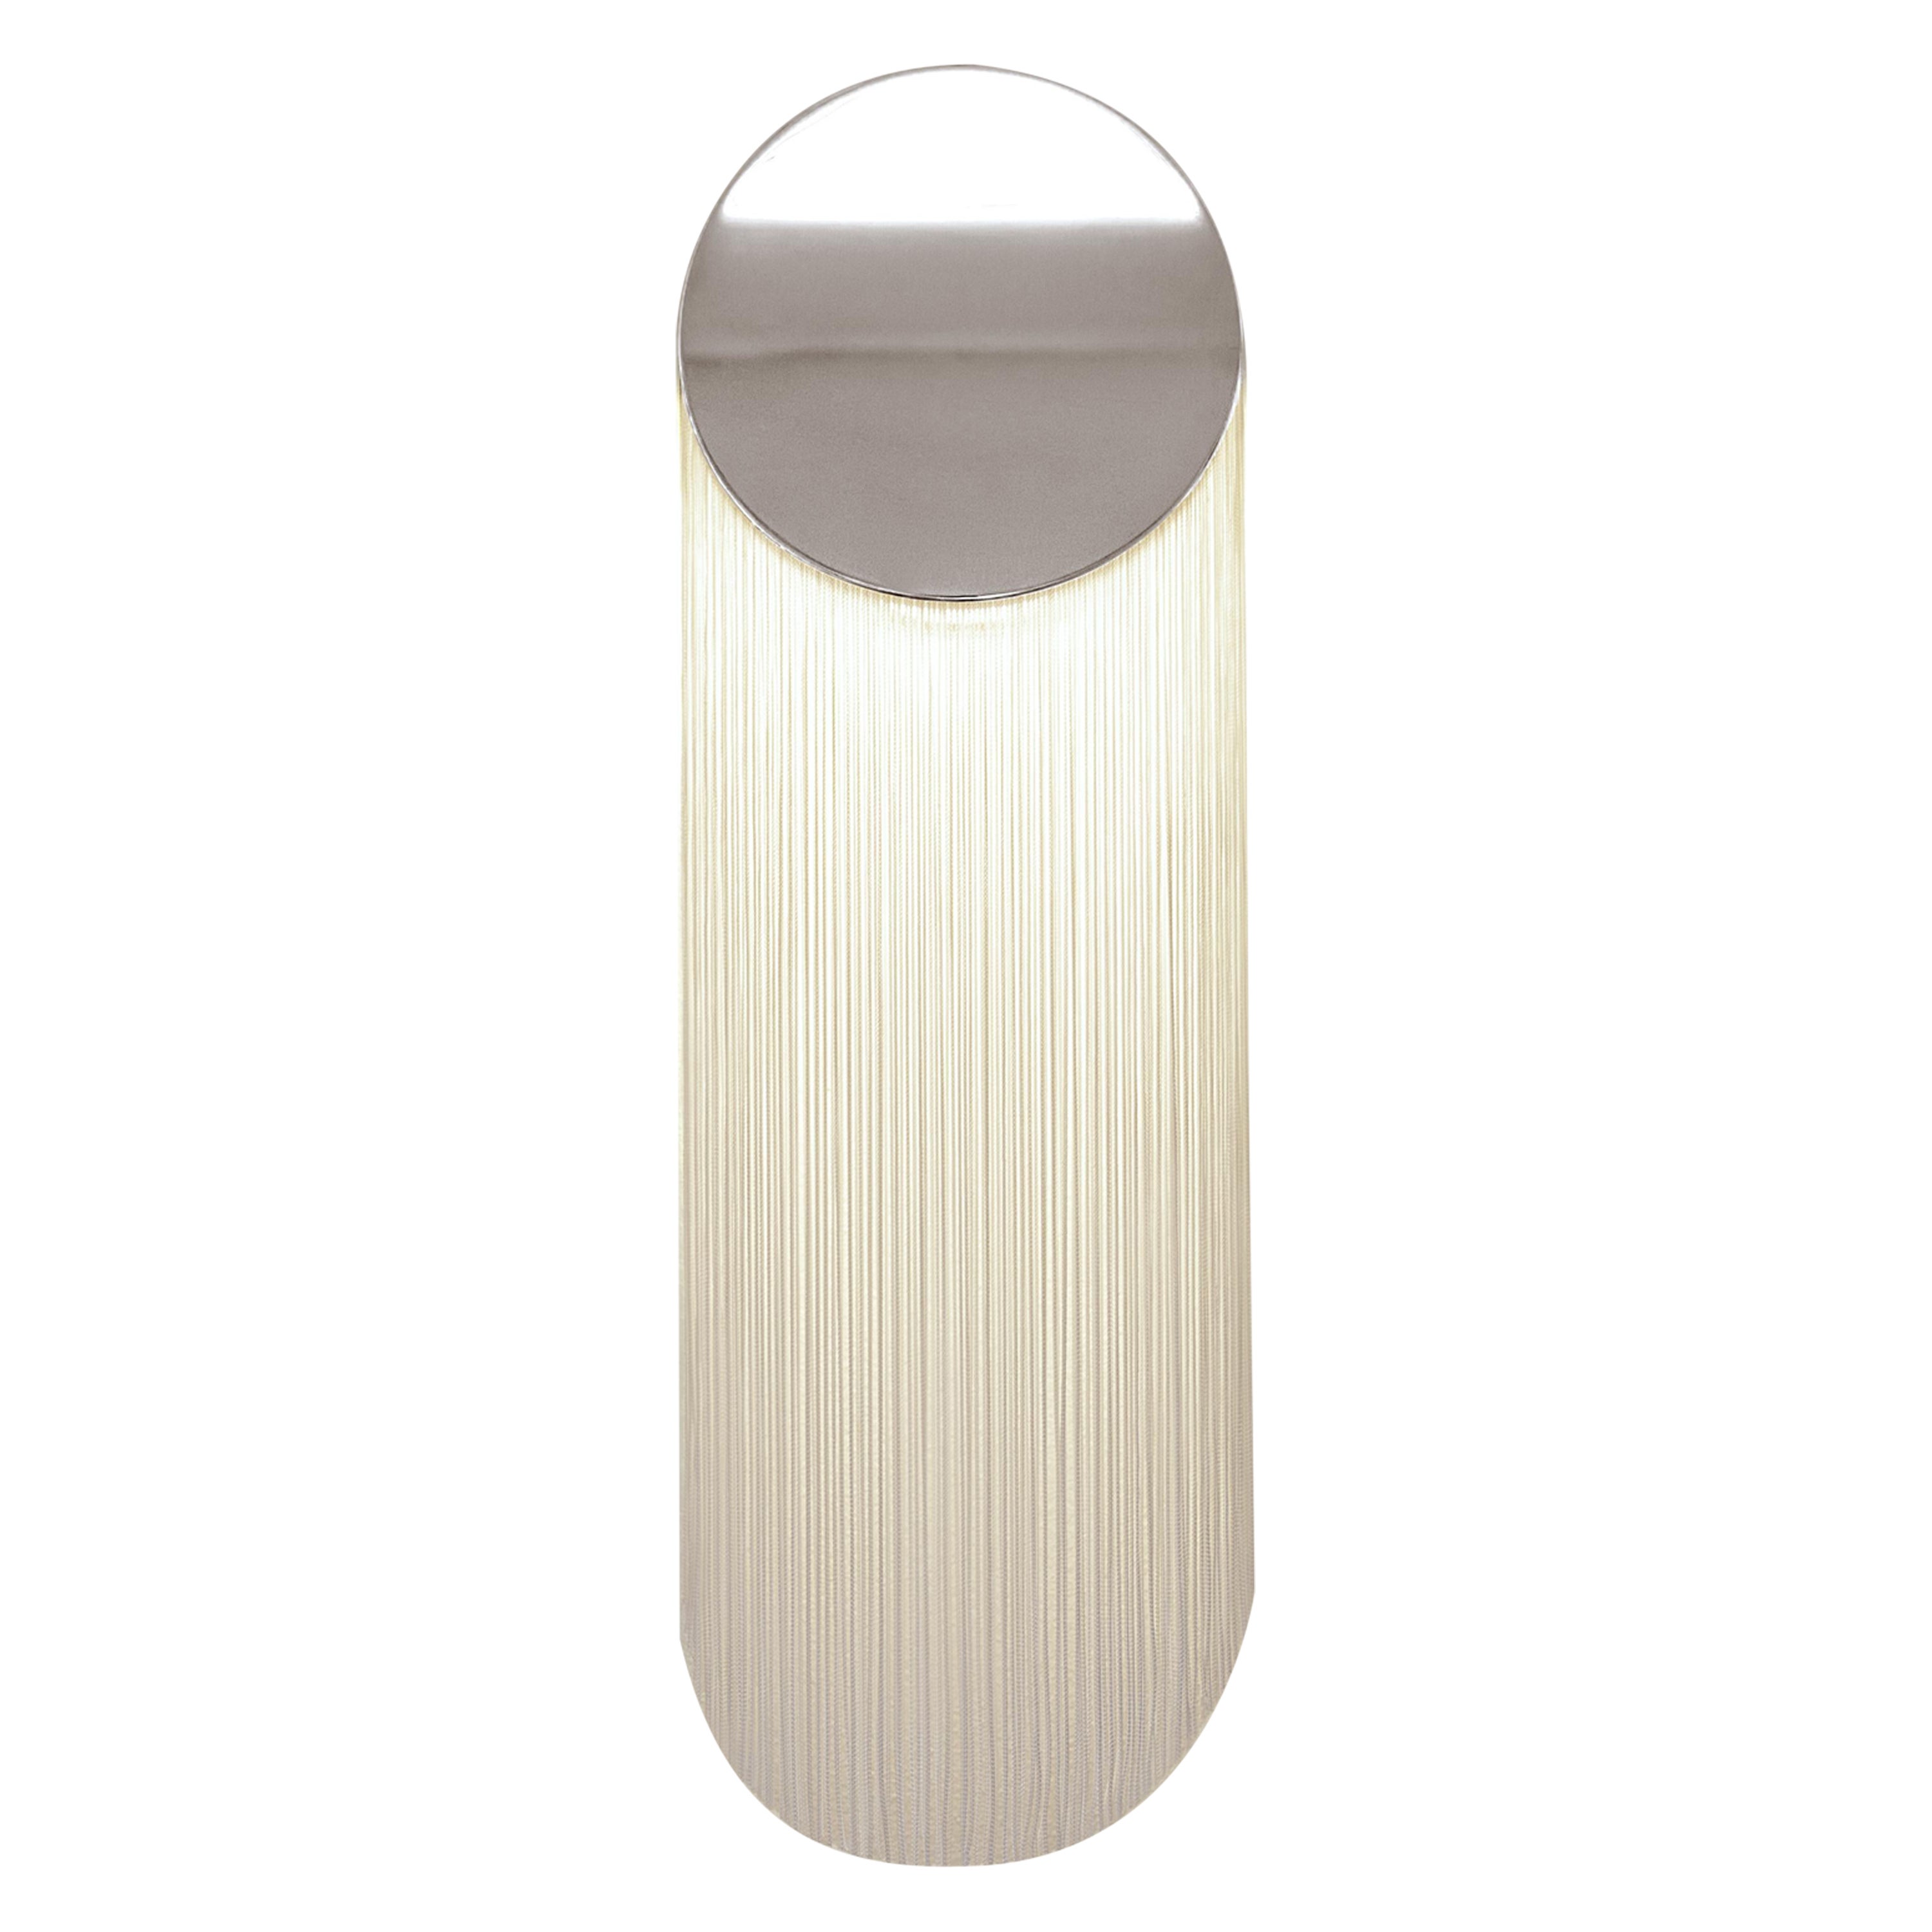 Cé Petite Chrome Wall sconce with Natural White Rayon Fringes by Studio d'Armes